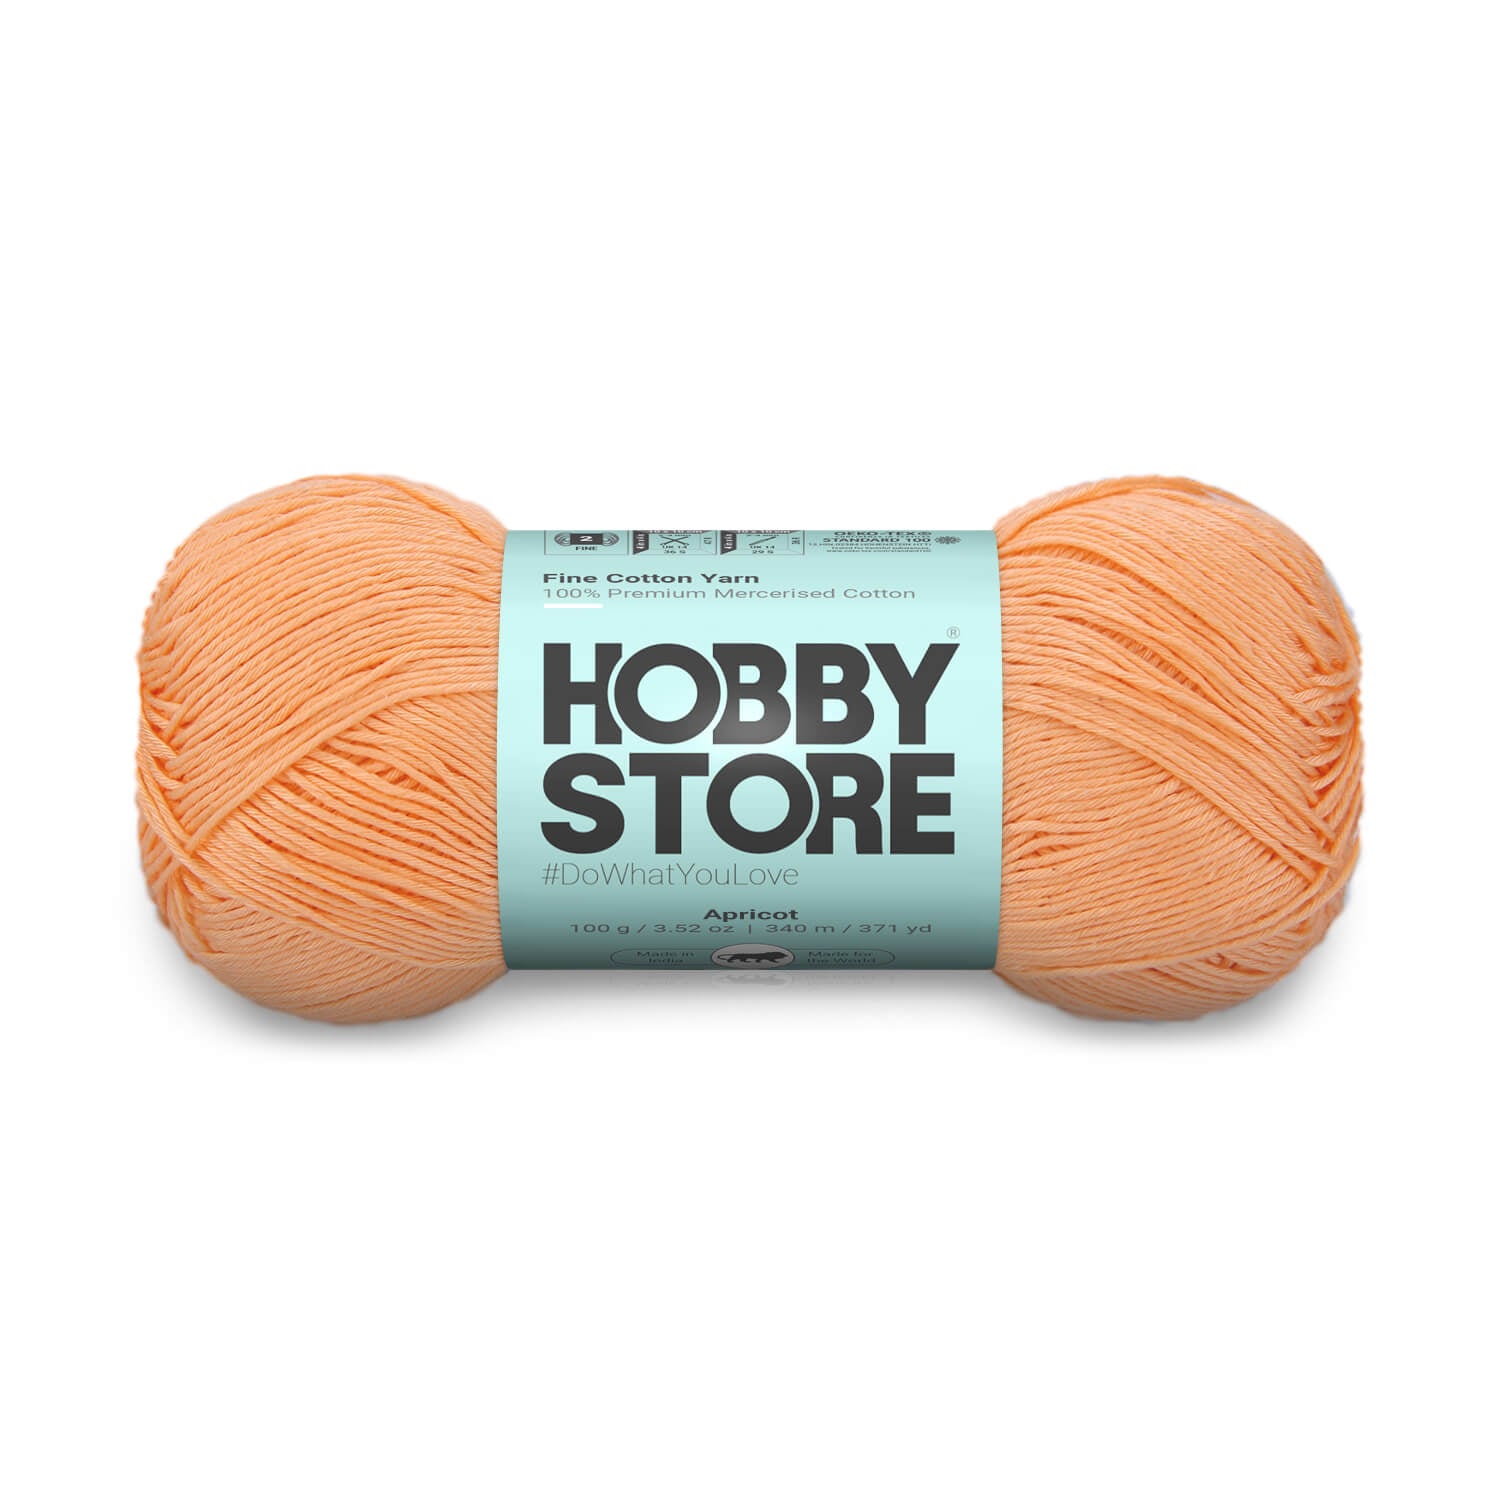 Fine Mercerised Cotton Yarn by Hobby Store - Apricot 201